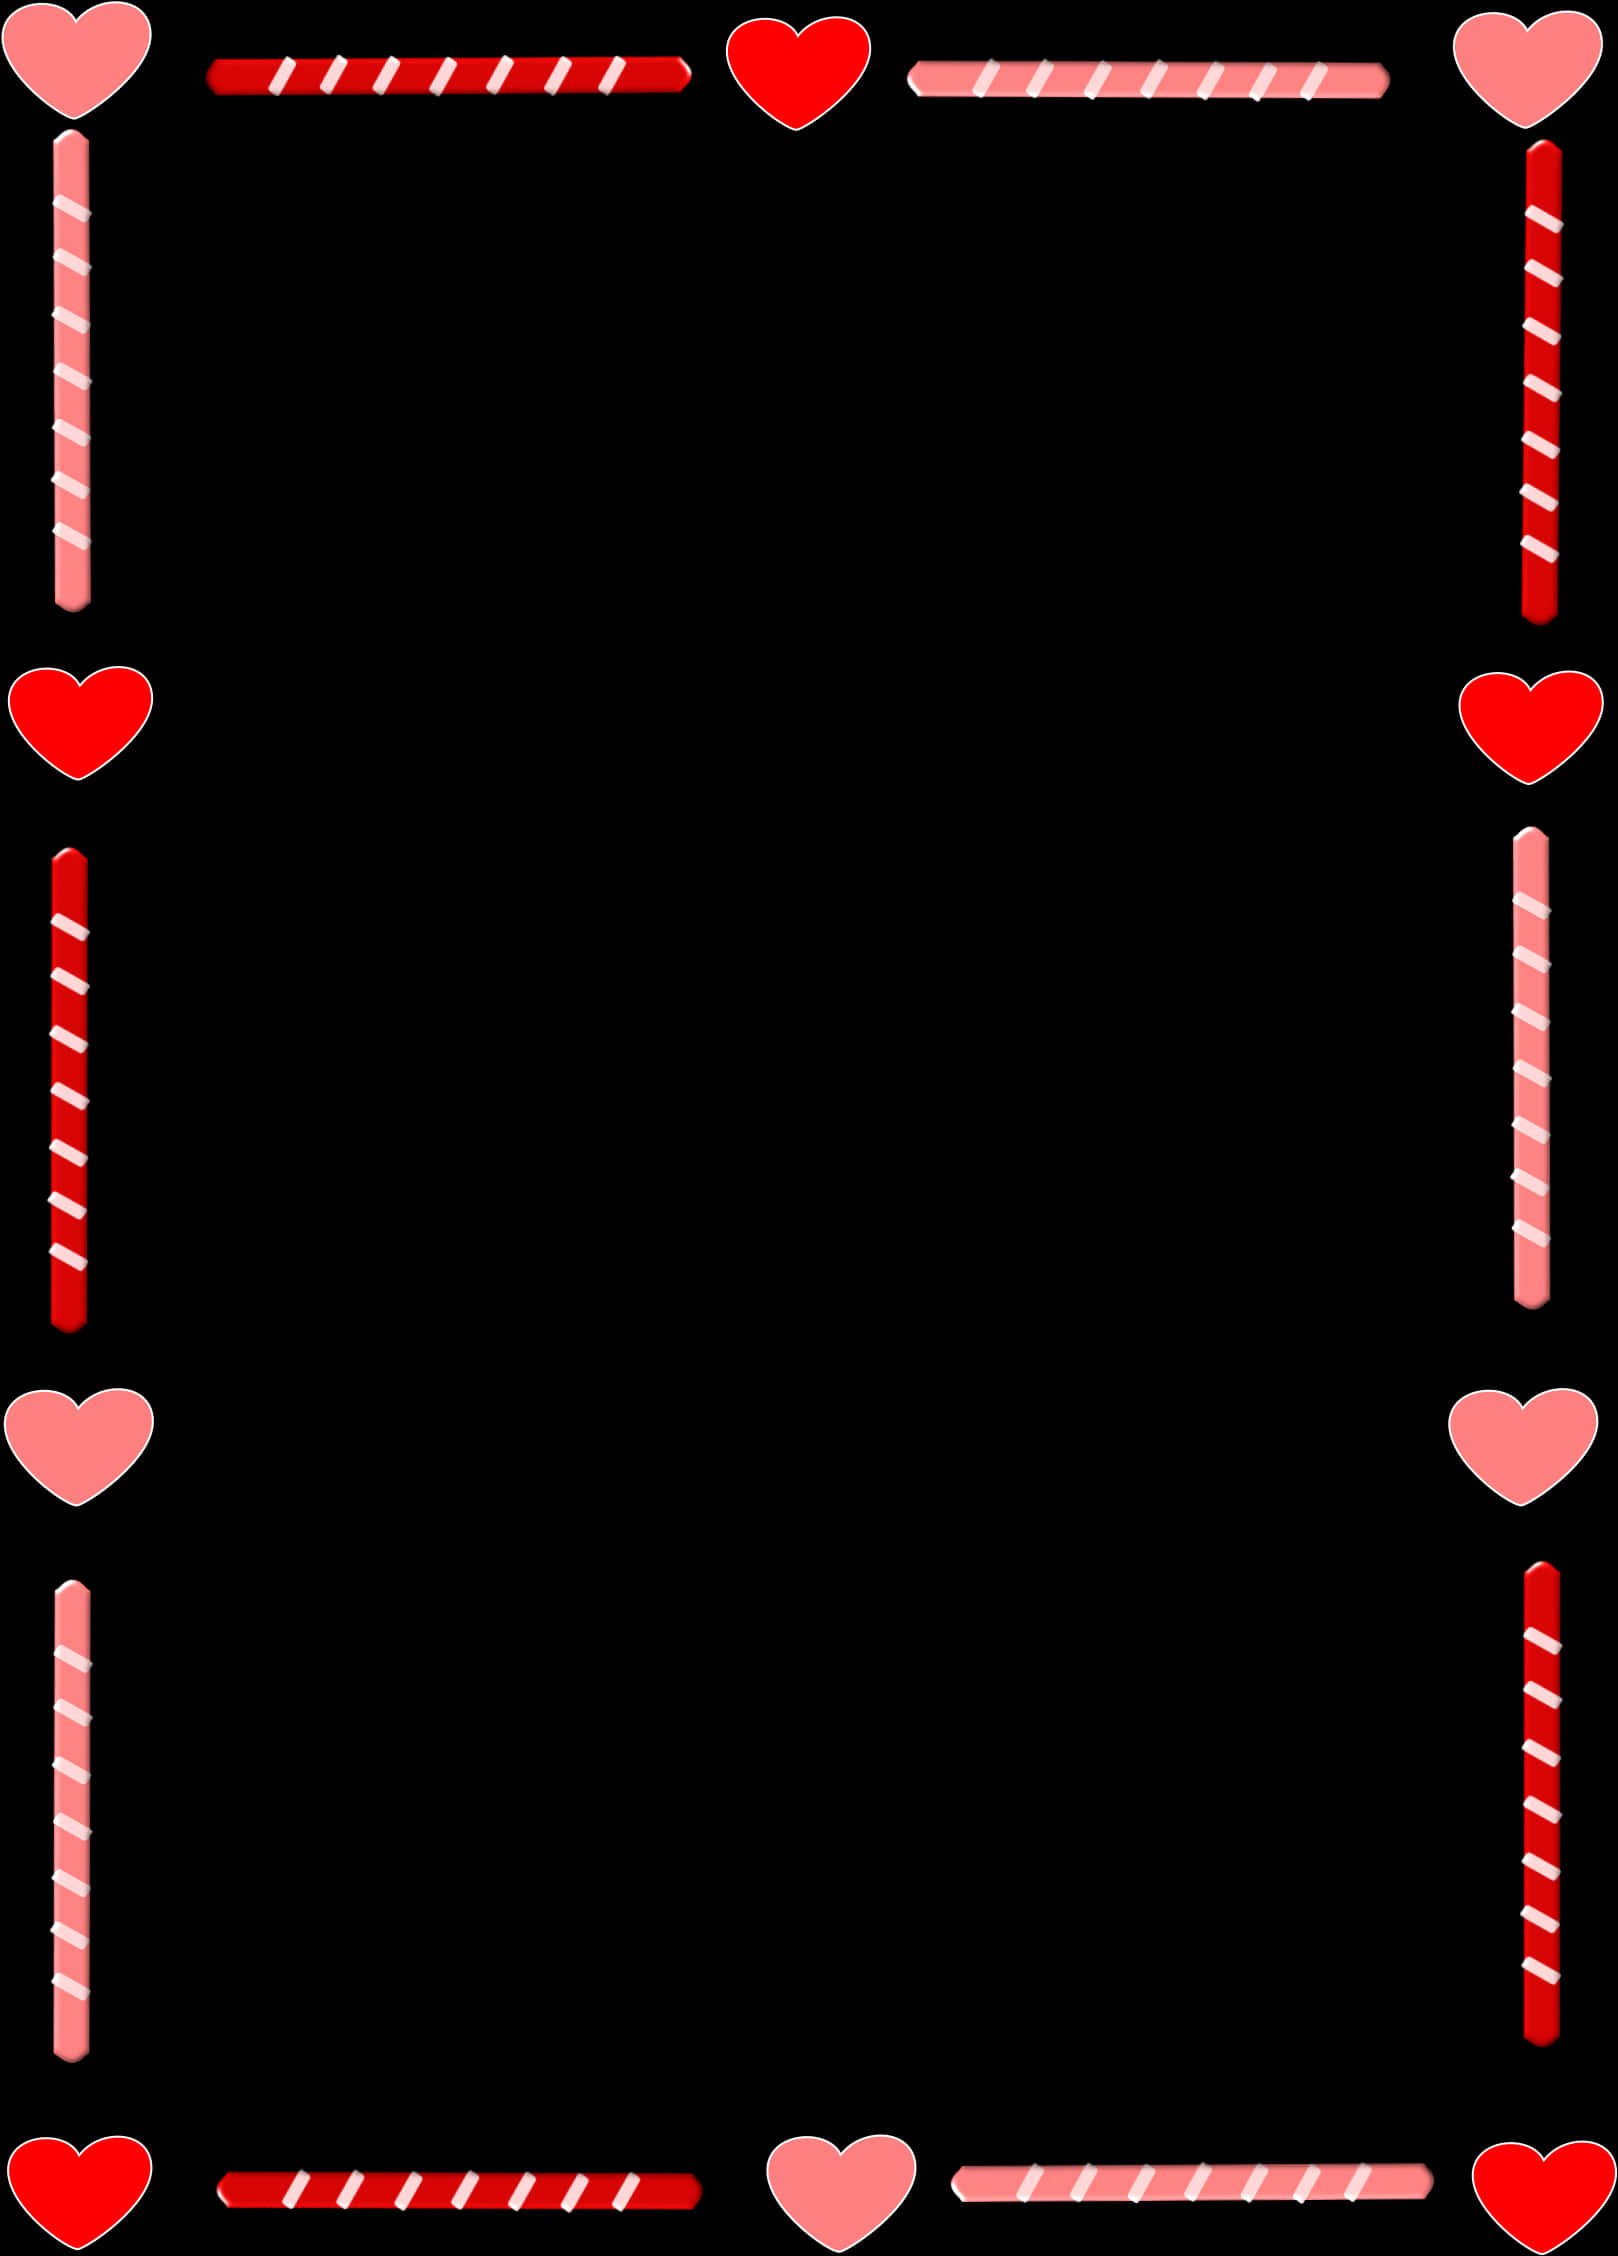 Candy Cane Heart Border PNG